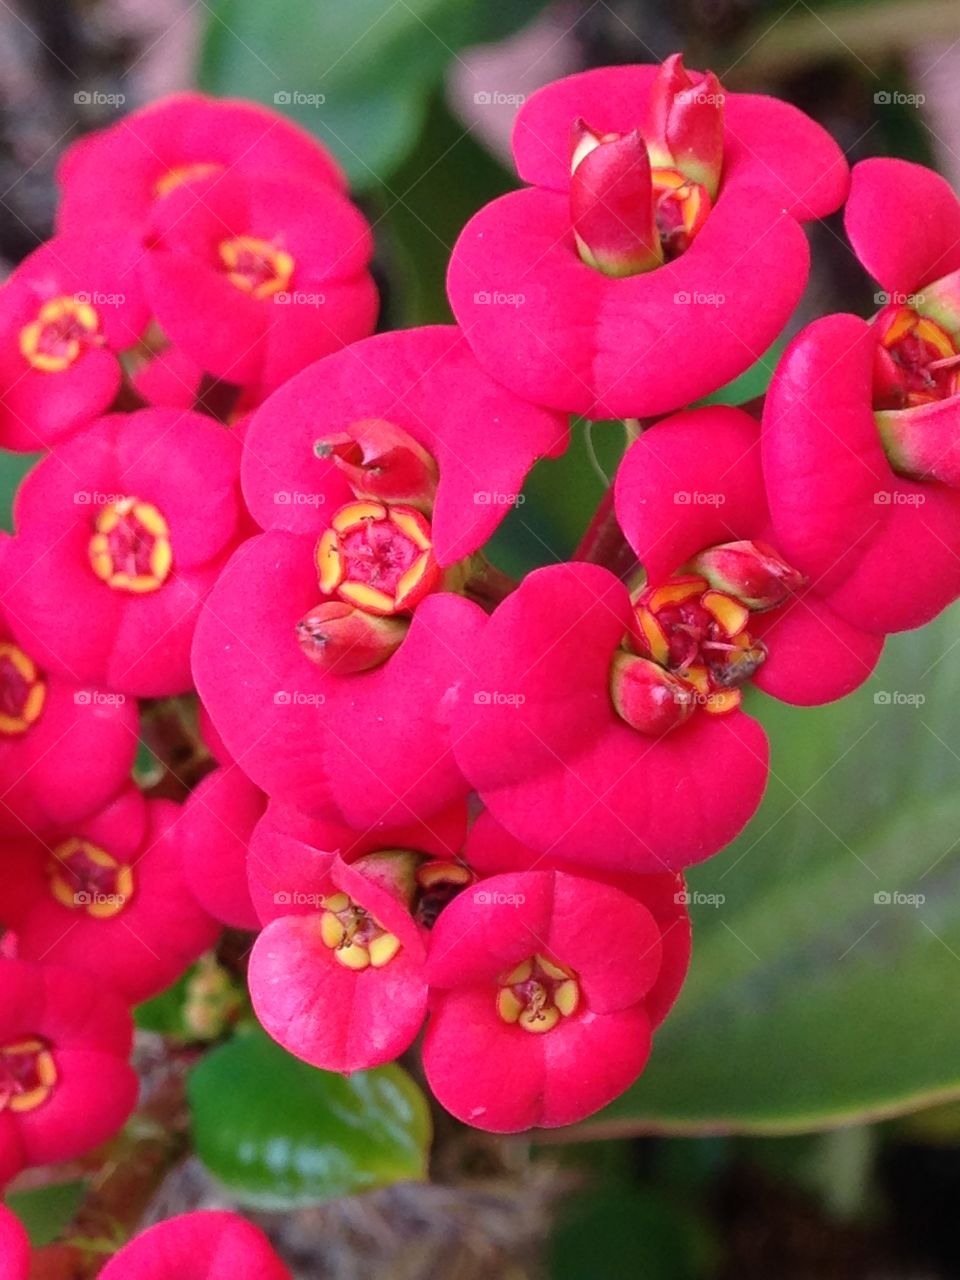 Crown of thorns plant 